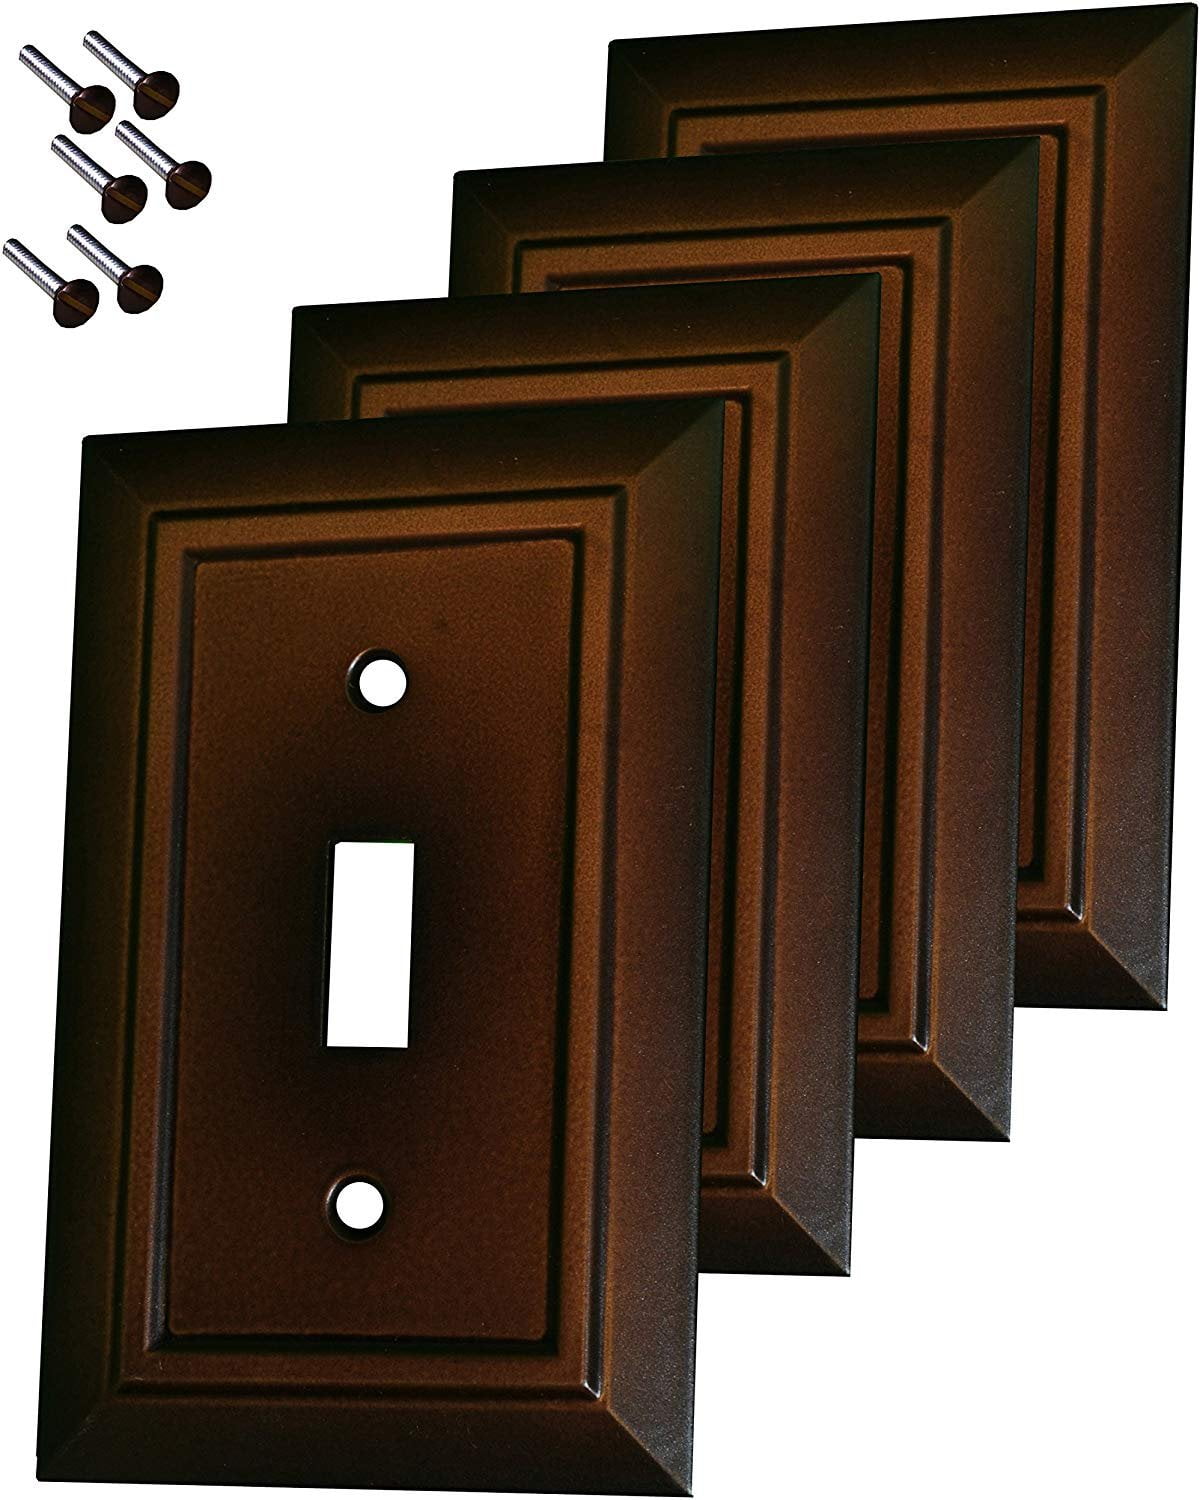 Pack of 4 Wall Plate Outlet Switch Covers by SleekLighting | Decorative